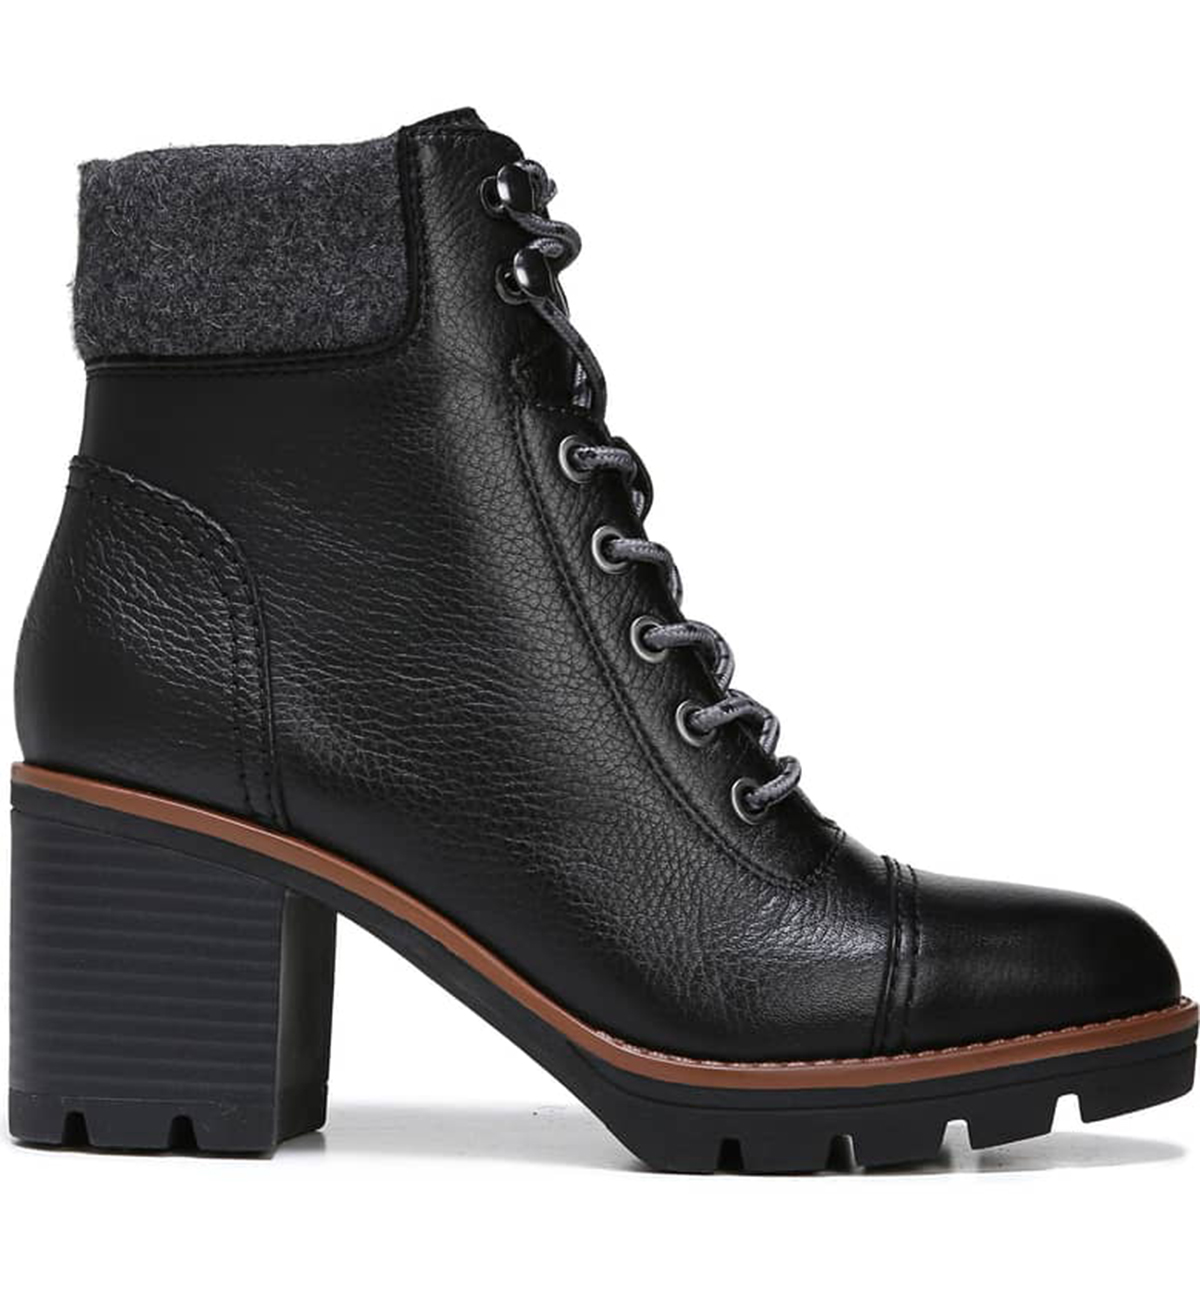 Waterproof Boots That Are Trendy \u0026 More 